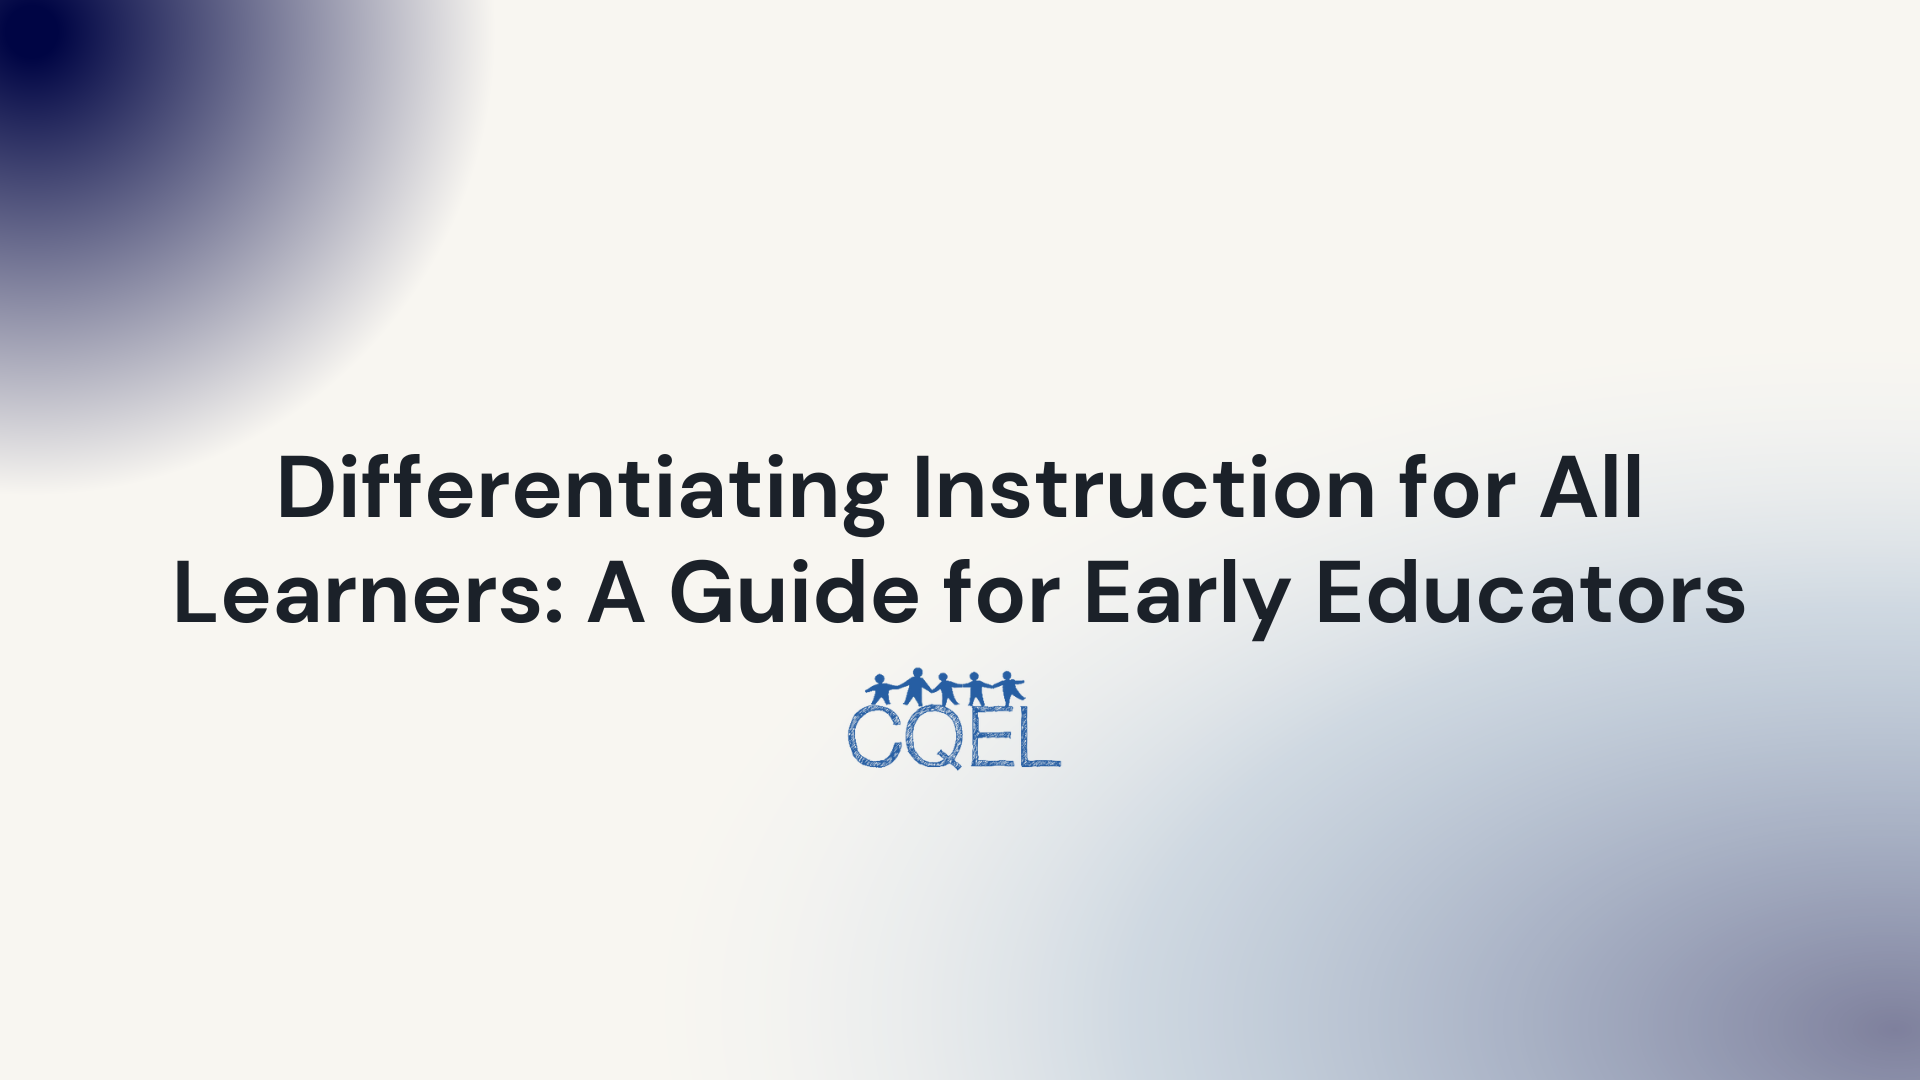 Differentiating Instruction for All Learners: A Guide for Early Educators